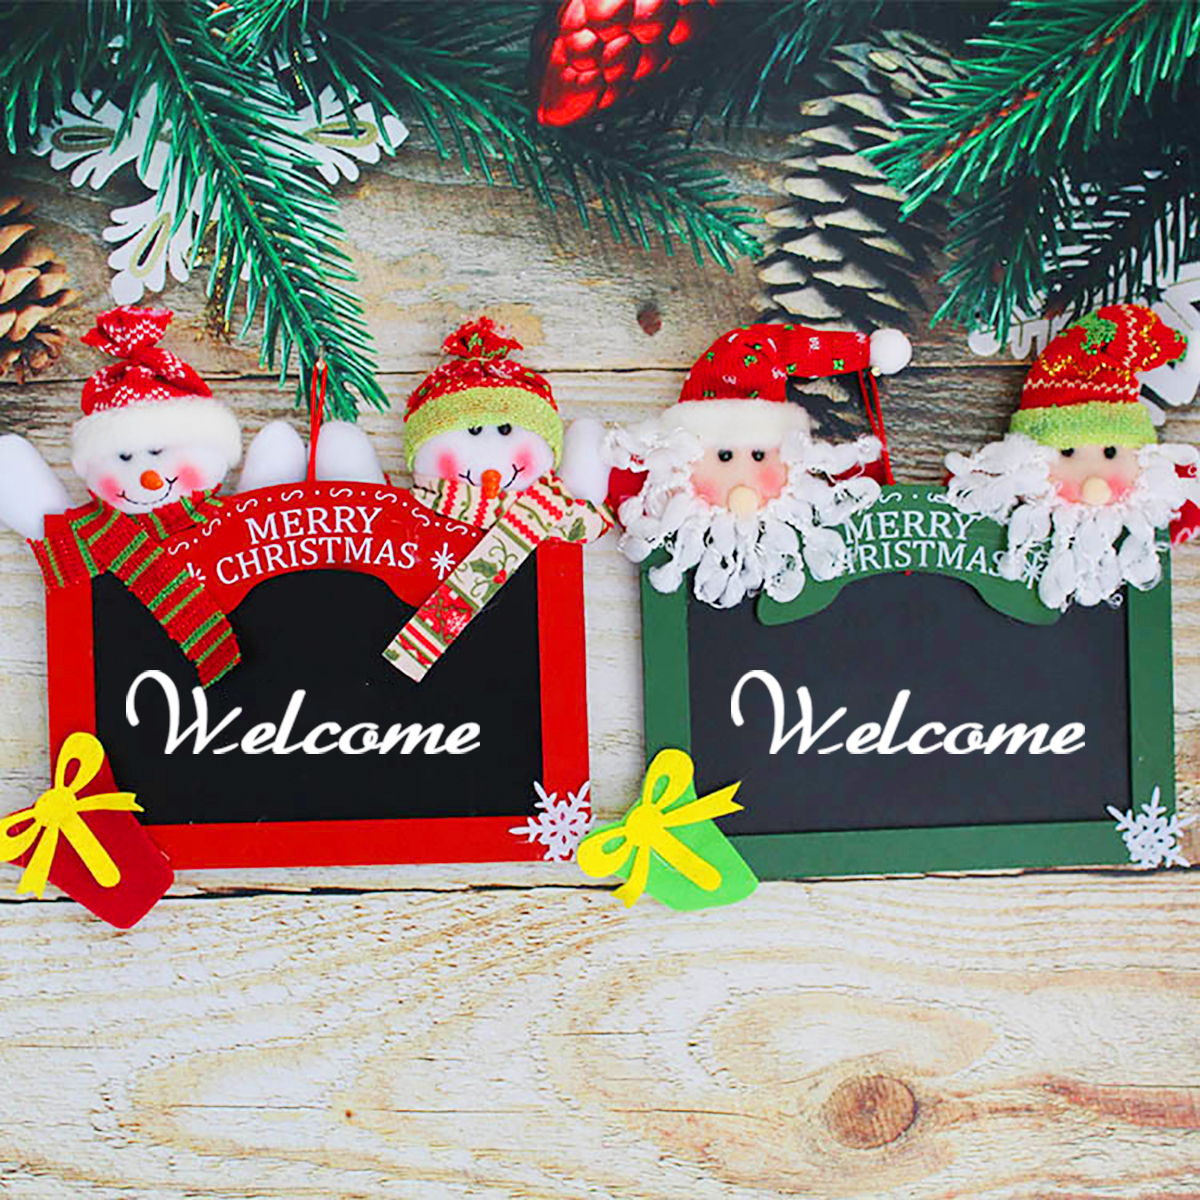 Merry-Christmas-Hanging-Sign-Wooden-Square-Blackboard-Wall-Door-Decoration-Hanging-Tags-for-DIY-Xmas-1904791-2